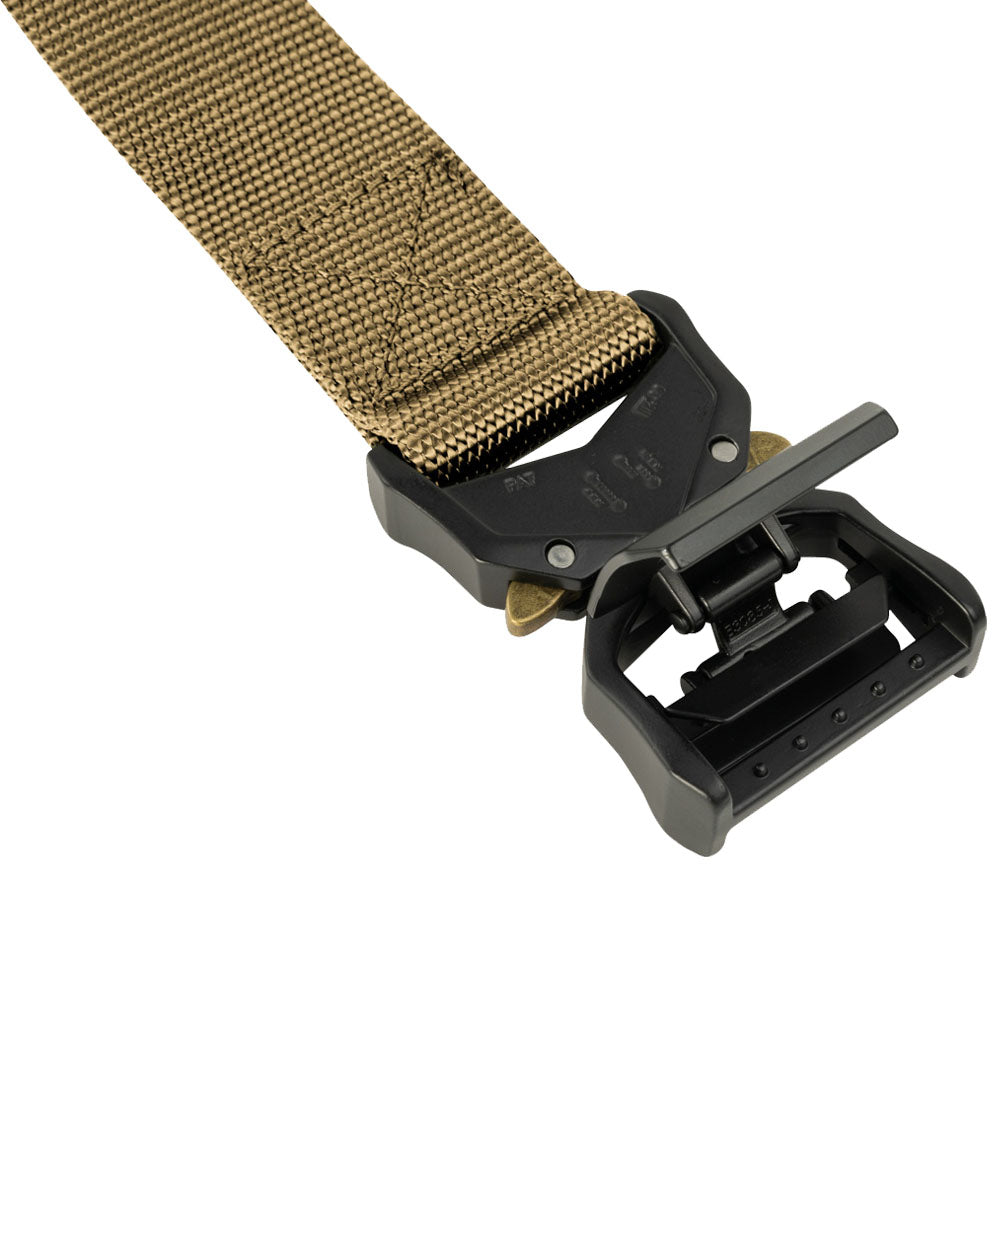 Coyote coloured Viper Fast Belt on White Background 